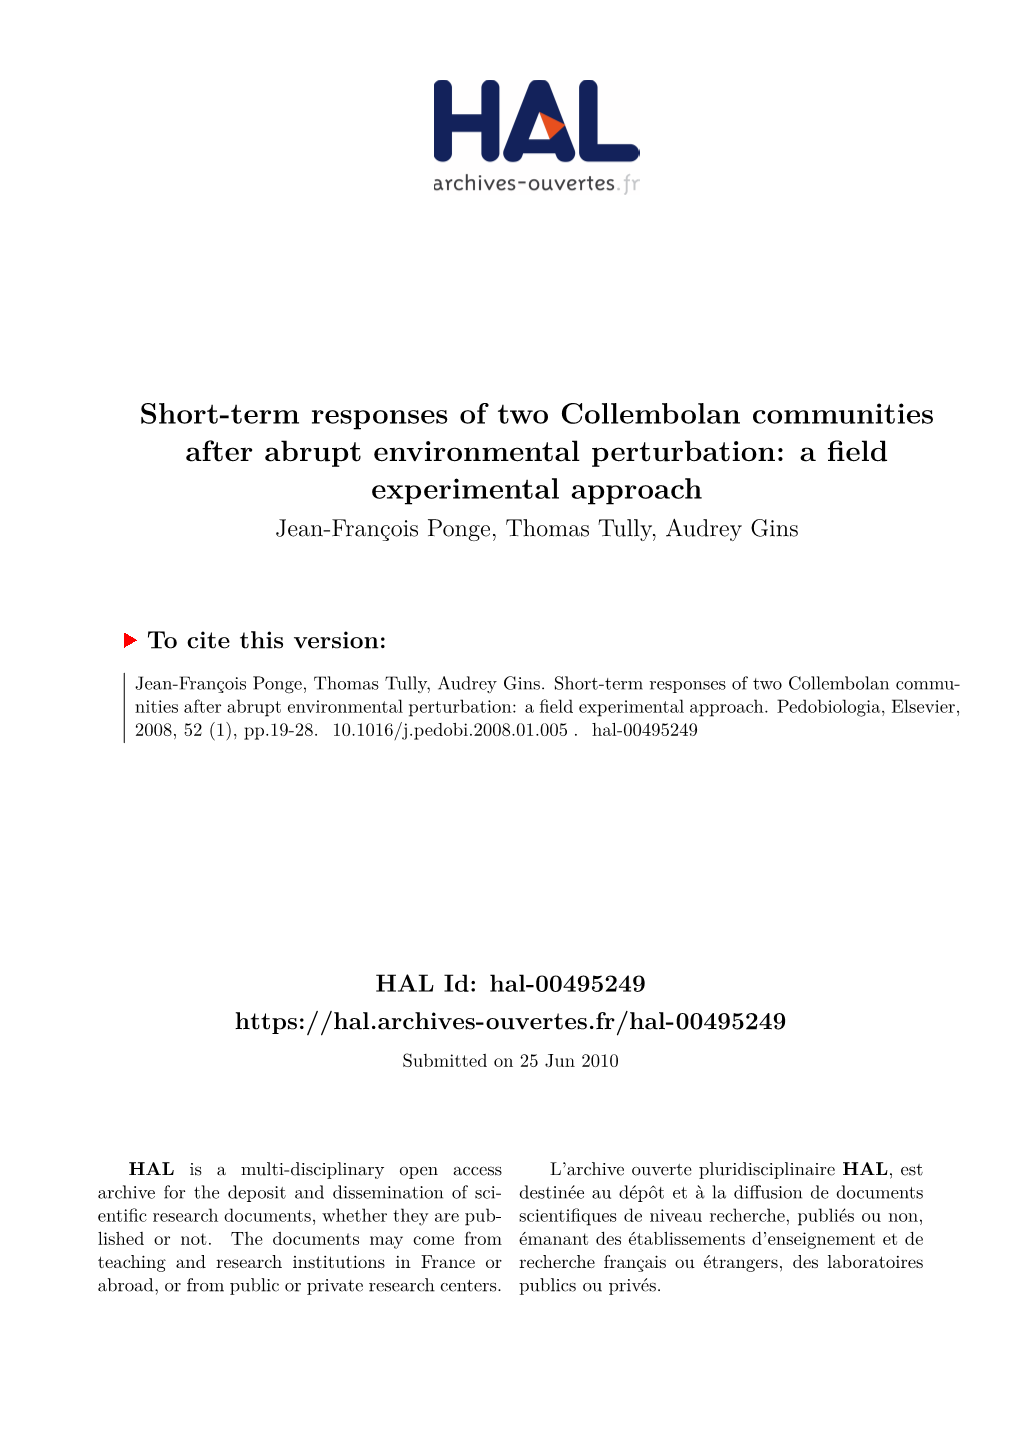 Short-Term Responses of Two Collembolan Communities After Abrupt Environmental Perturbation